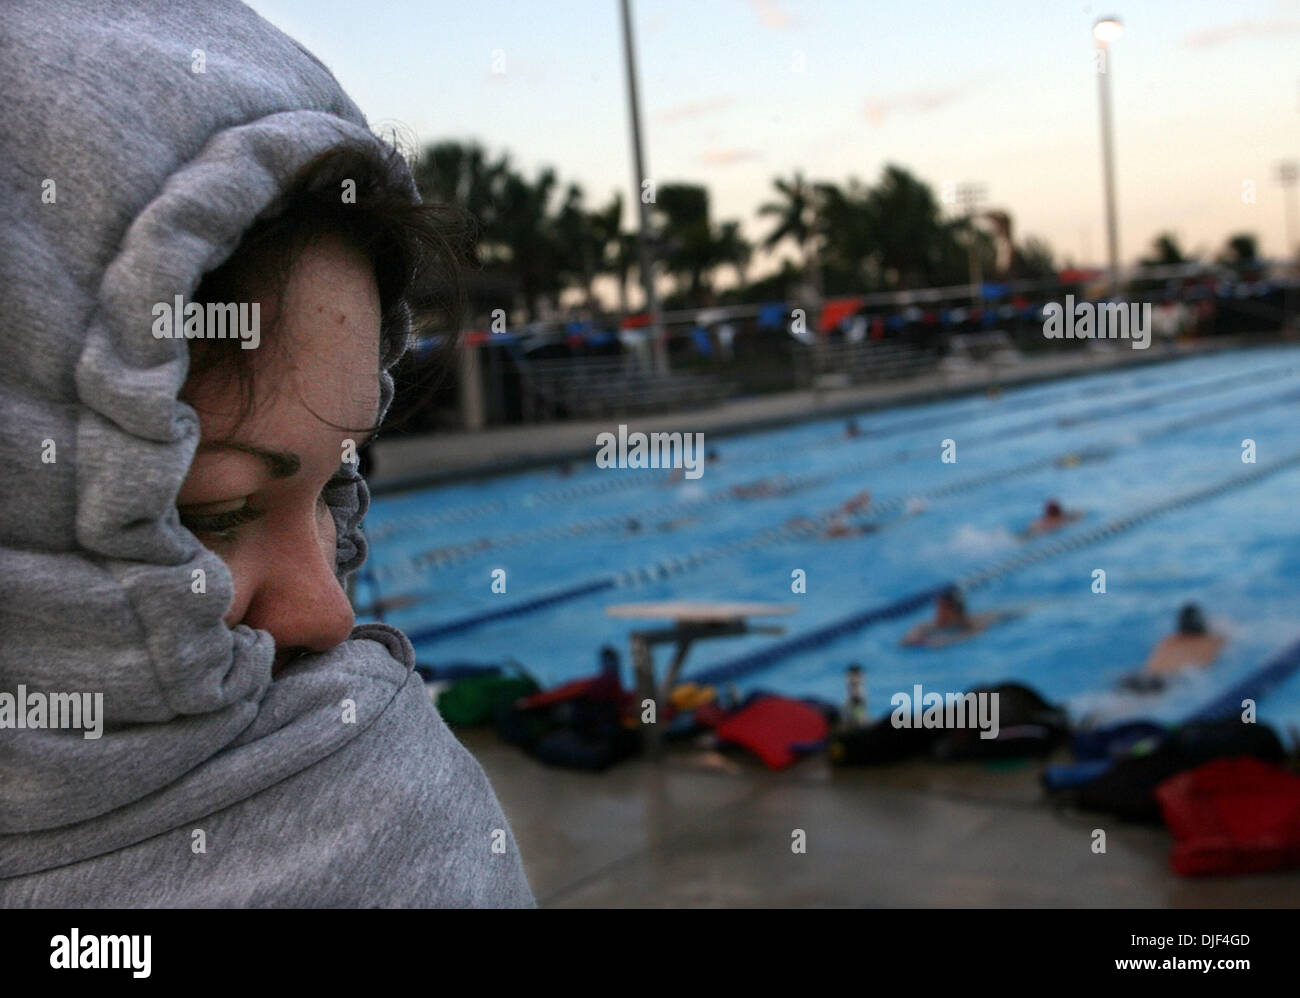 Jan 03, 2008 - Boca Raton, Florida, USA - Emory University trainer GINA SHIPMAN shivers under her sweatshirt as she watches her squad warm up for a swim meet between Florida Atlantic University, Emory University and Clemson University at the FAU Boca Raton campus Thursday, Jan. 3, 2008. Temperatures hovered near freezing when the sun rose. (Credit Image: © Chris Matula/Palm Beach P Stock Photo